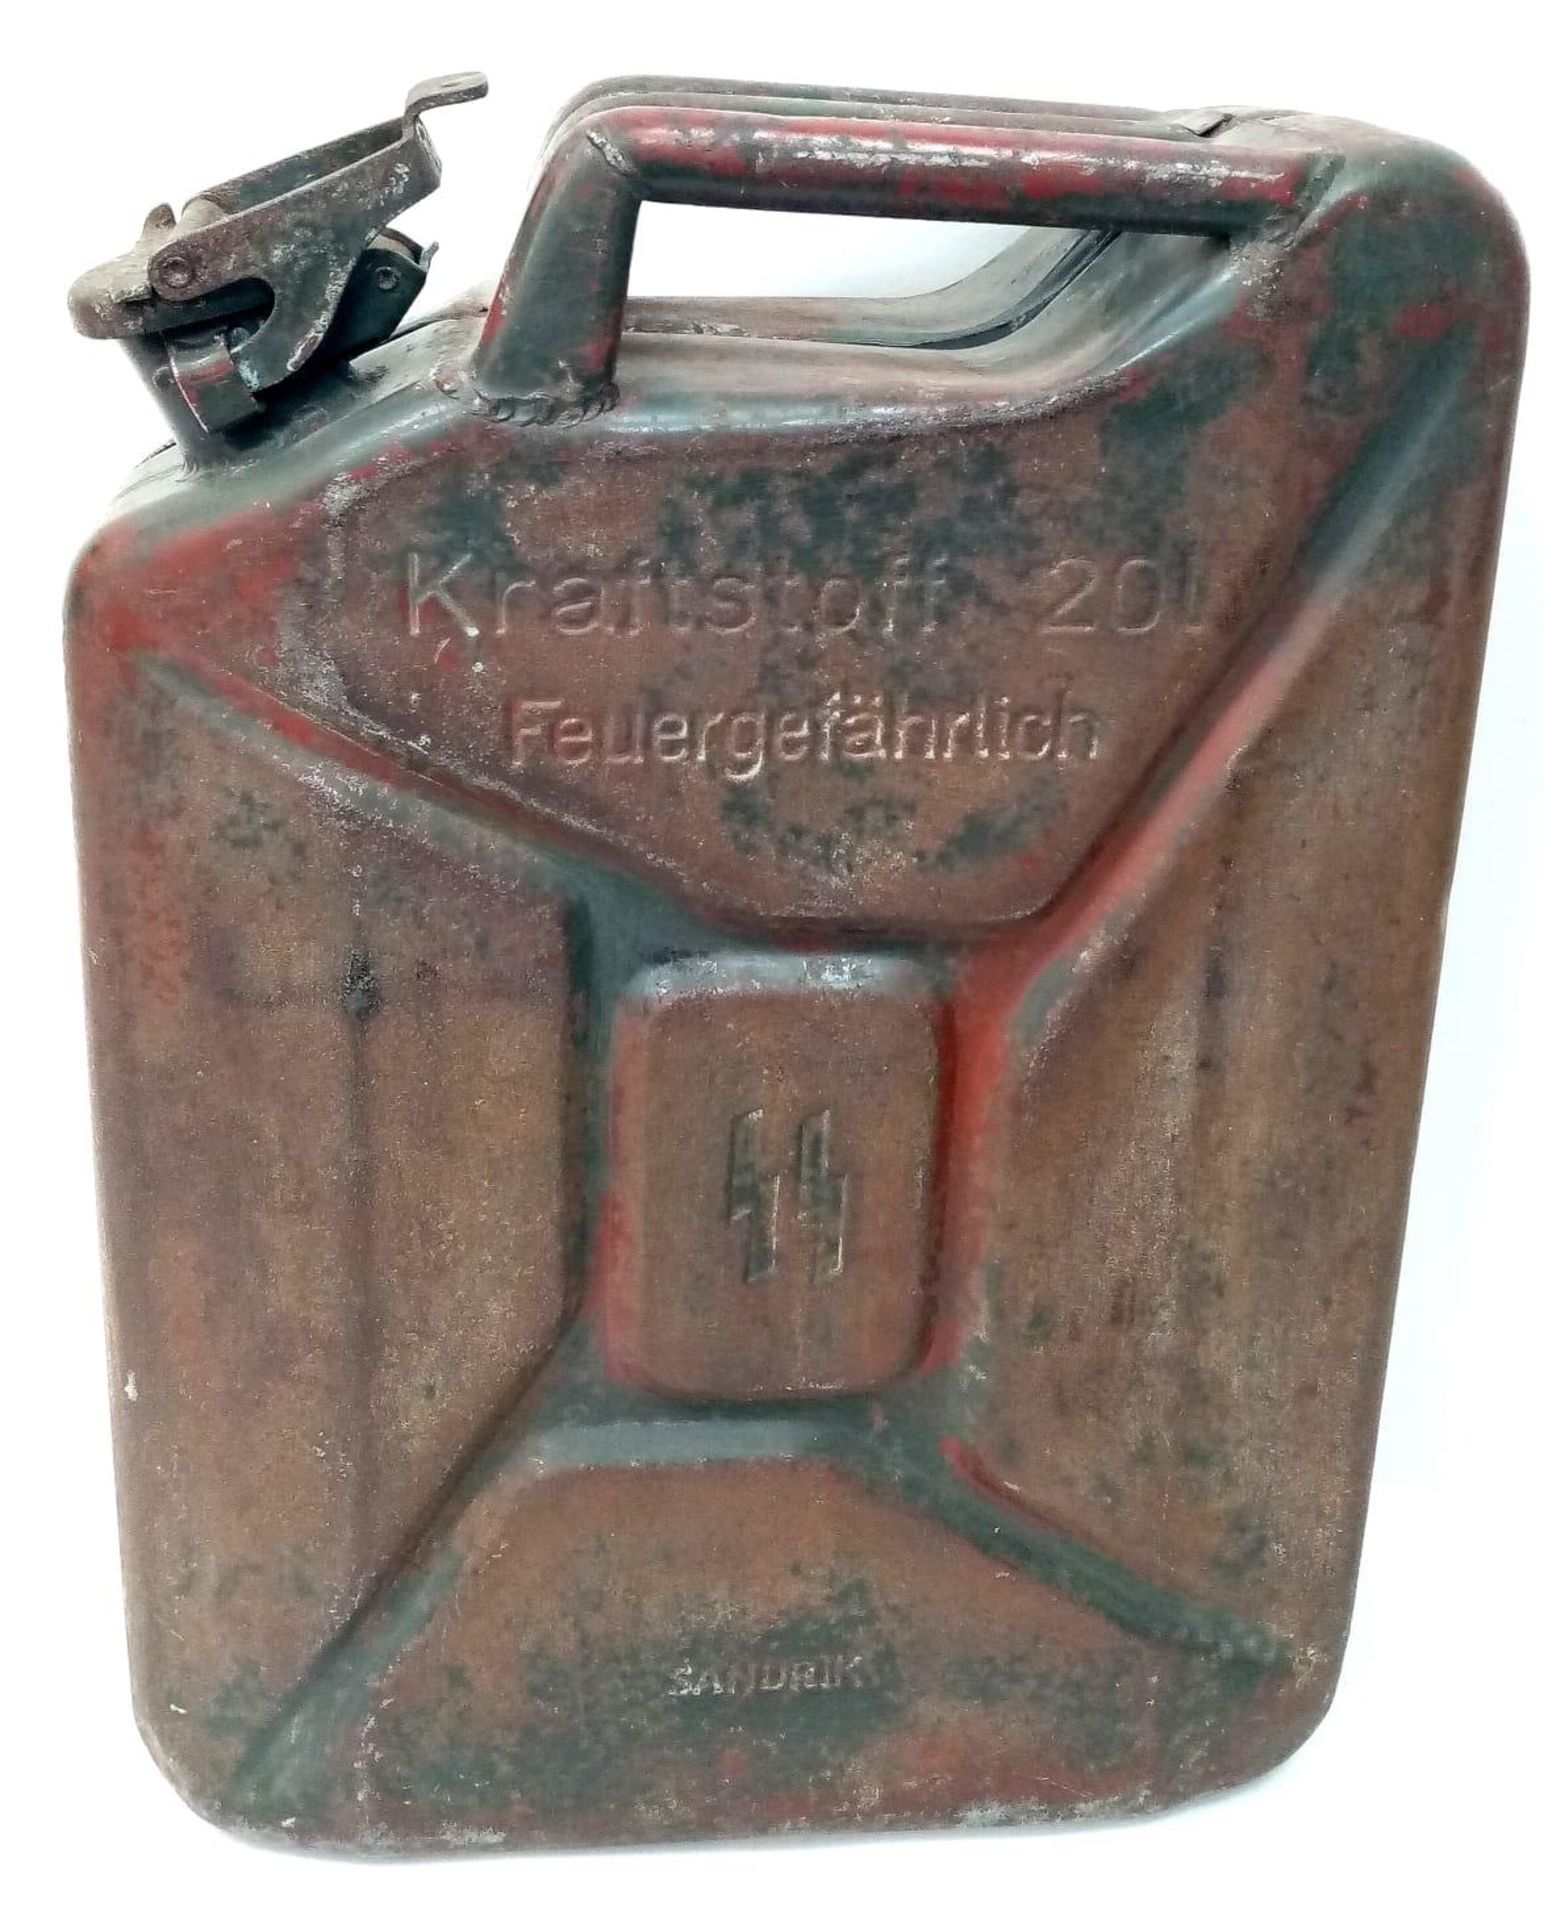 100% Genuine Waffen SS 20 Ltr. Jerry Can Made by Sandrik. This can was found in Normandy France.